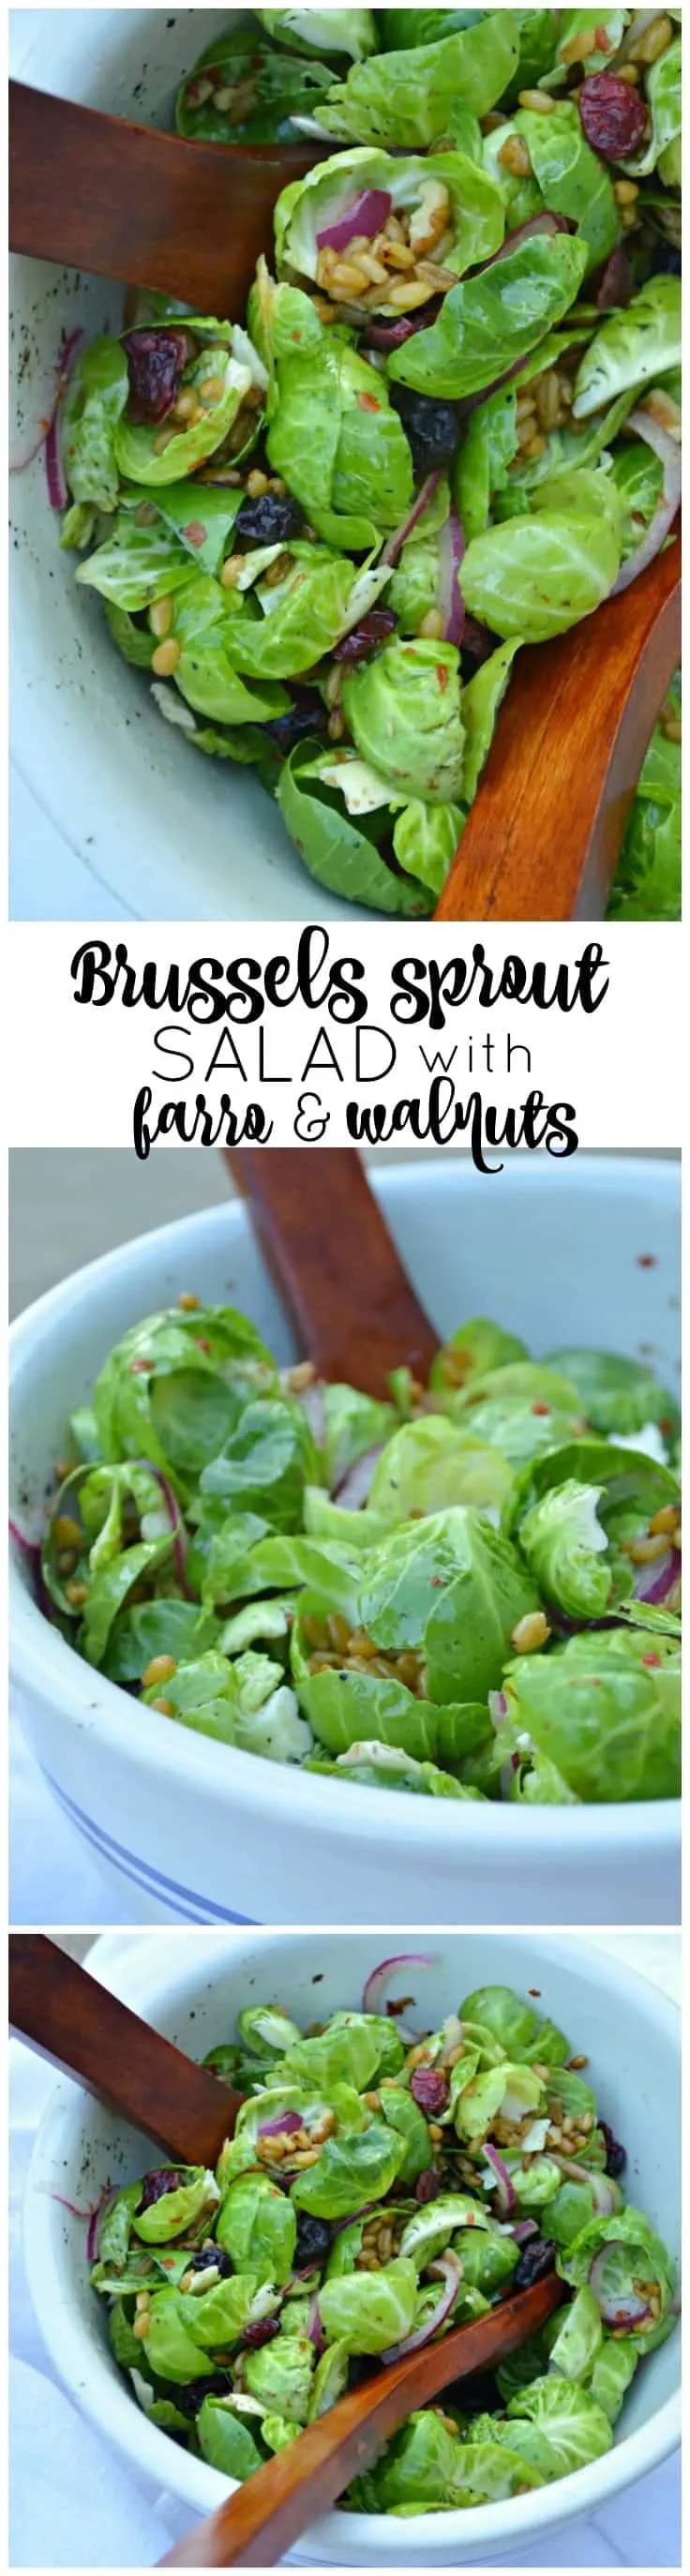 Brussels Sprout Salad with Farro and Walnuts is a crisp, fresh addition to your holiday table!